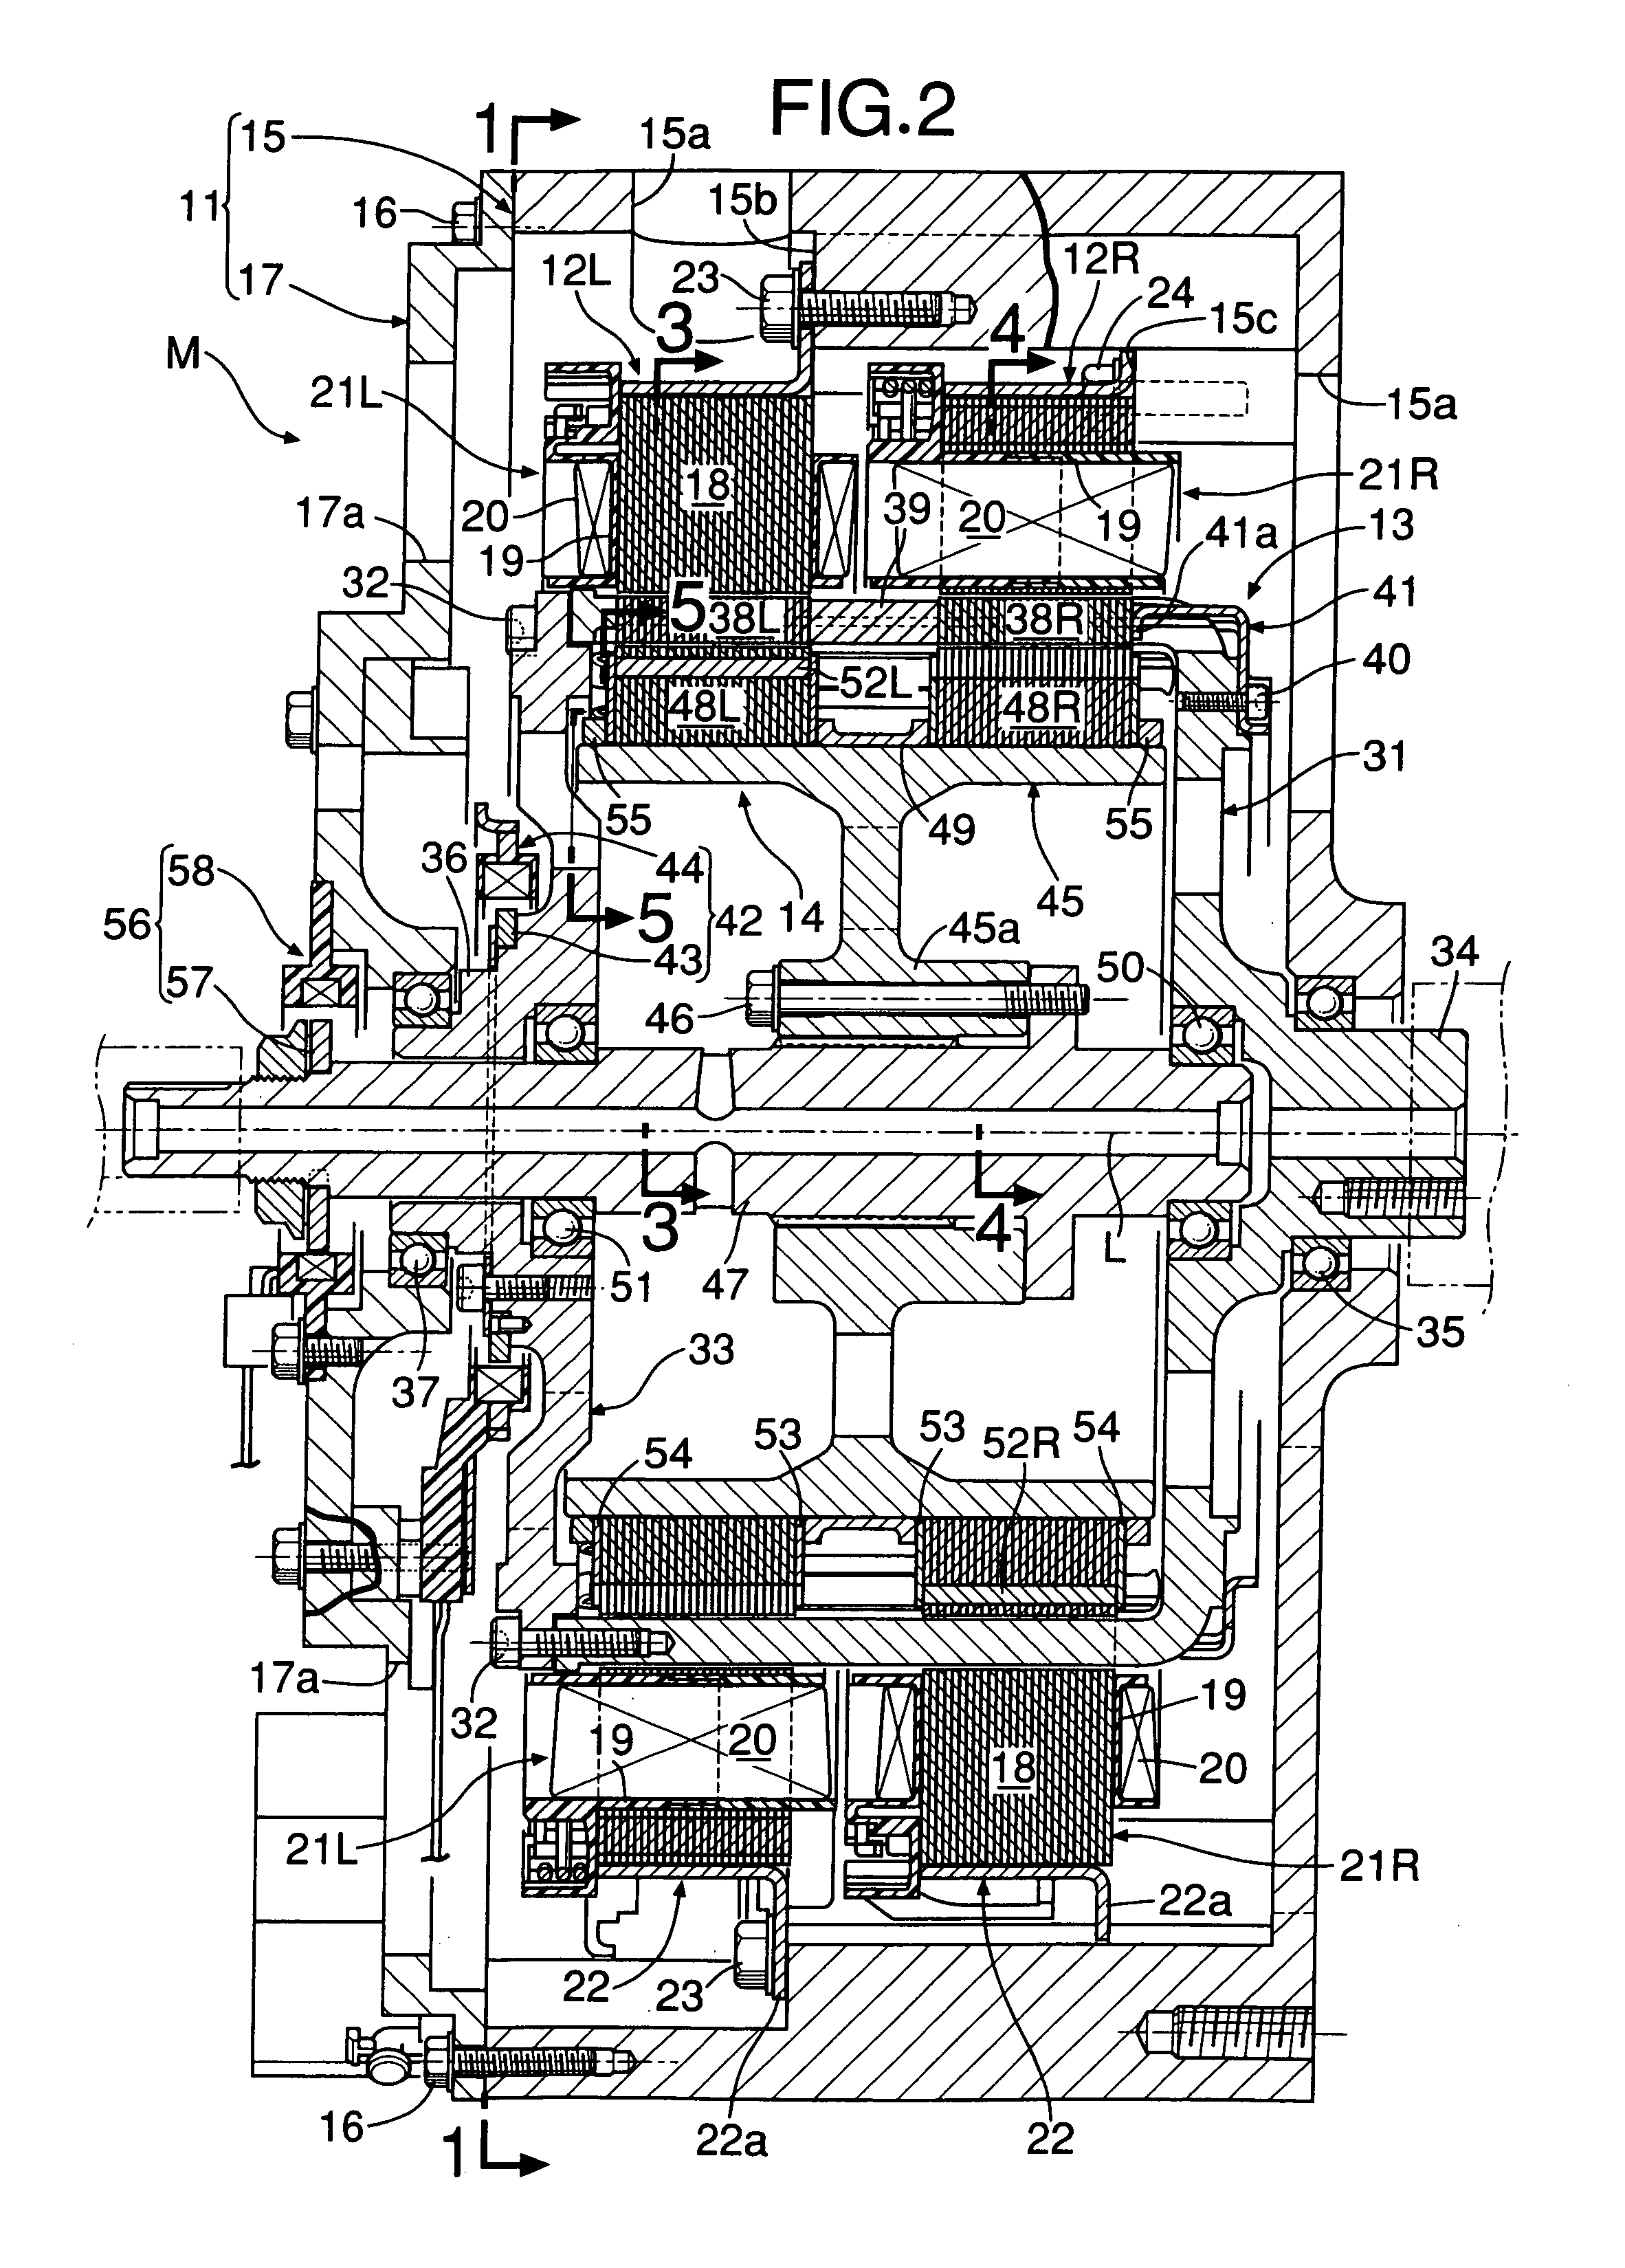 Motor, rotor structure and magnetic machine